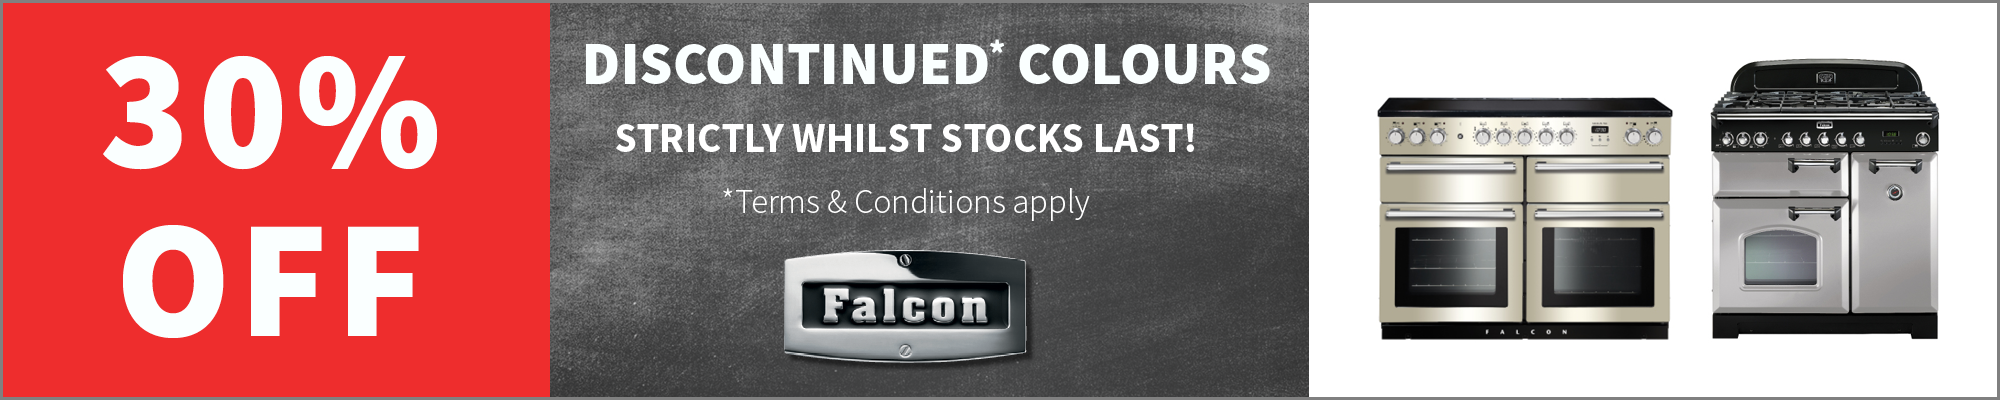 30% Off Falcon Cooker Discontinued* Colours, While Stocks Last